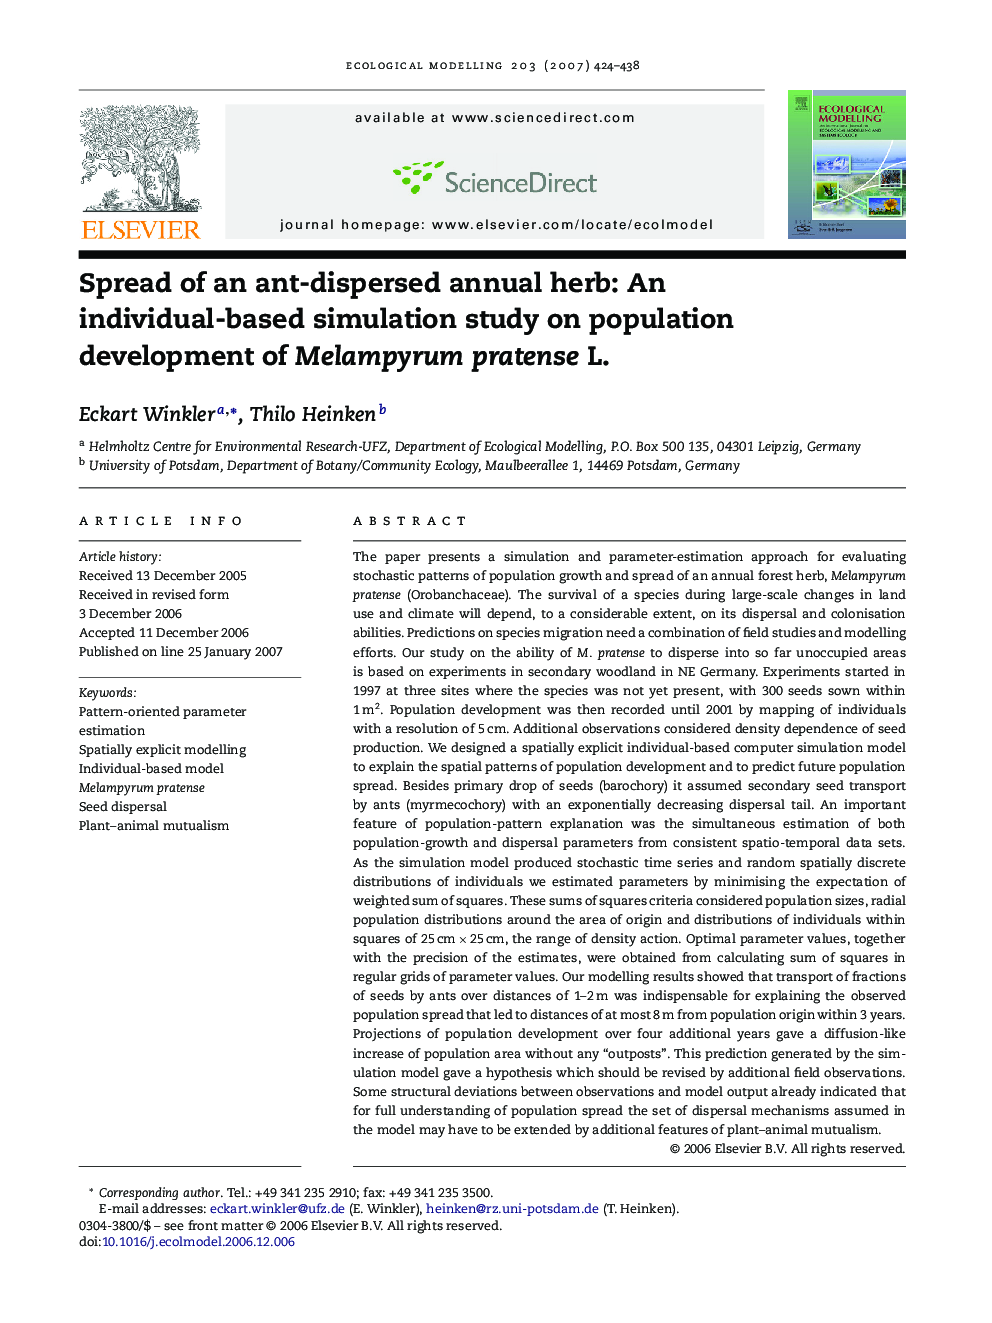 Spread of an ant-dispersed annual herb: An individual-based simulation study on population development of Melampyrum pratense L.